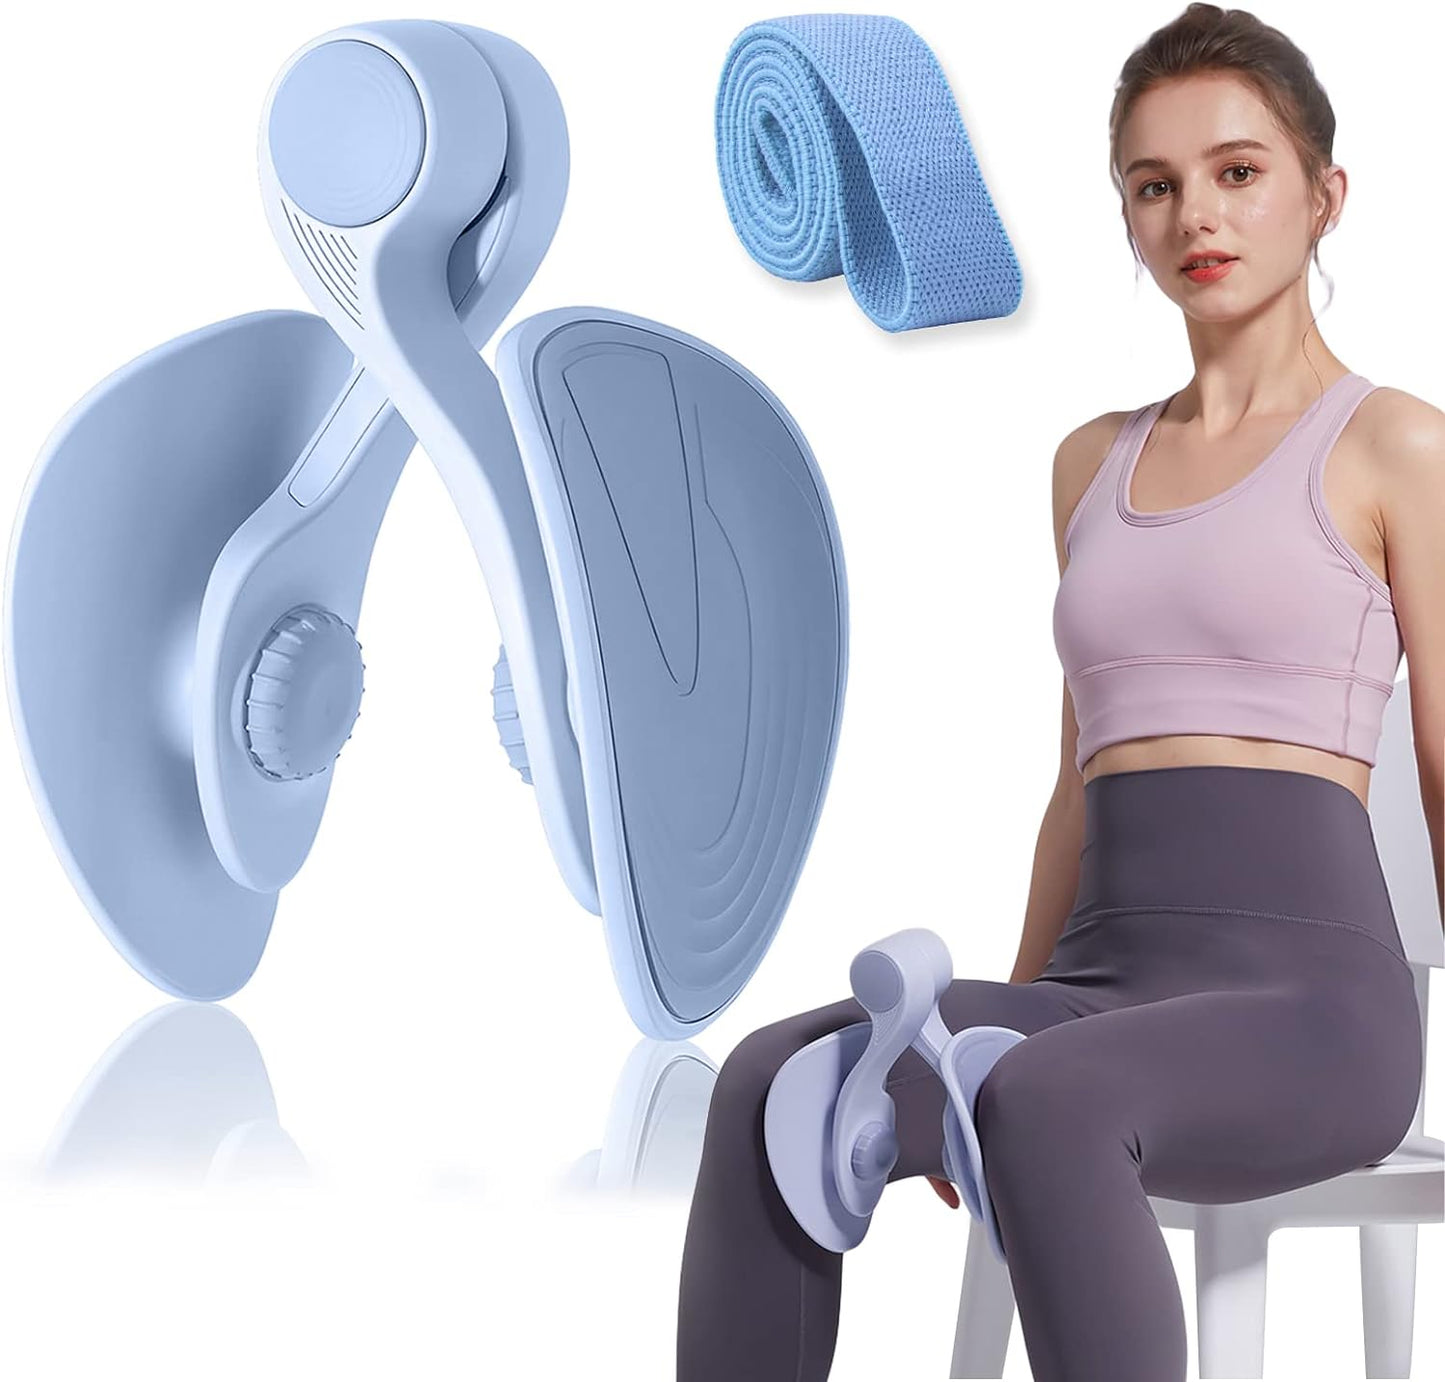 Thigh Master 35lb Pelvic Floor Muscle Repair Trainer Kegel Inner Thigh Exercise Workout Equipment Pilates for Home Workouts Hip Under Desk Exercise Men Women with Band